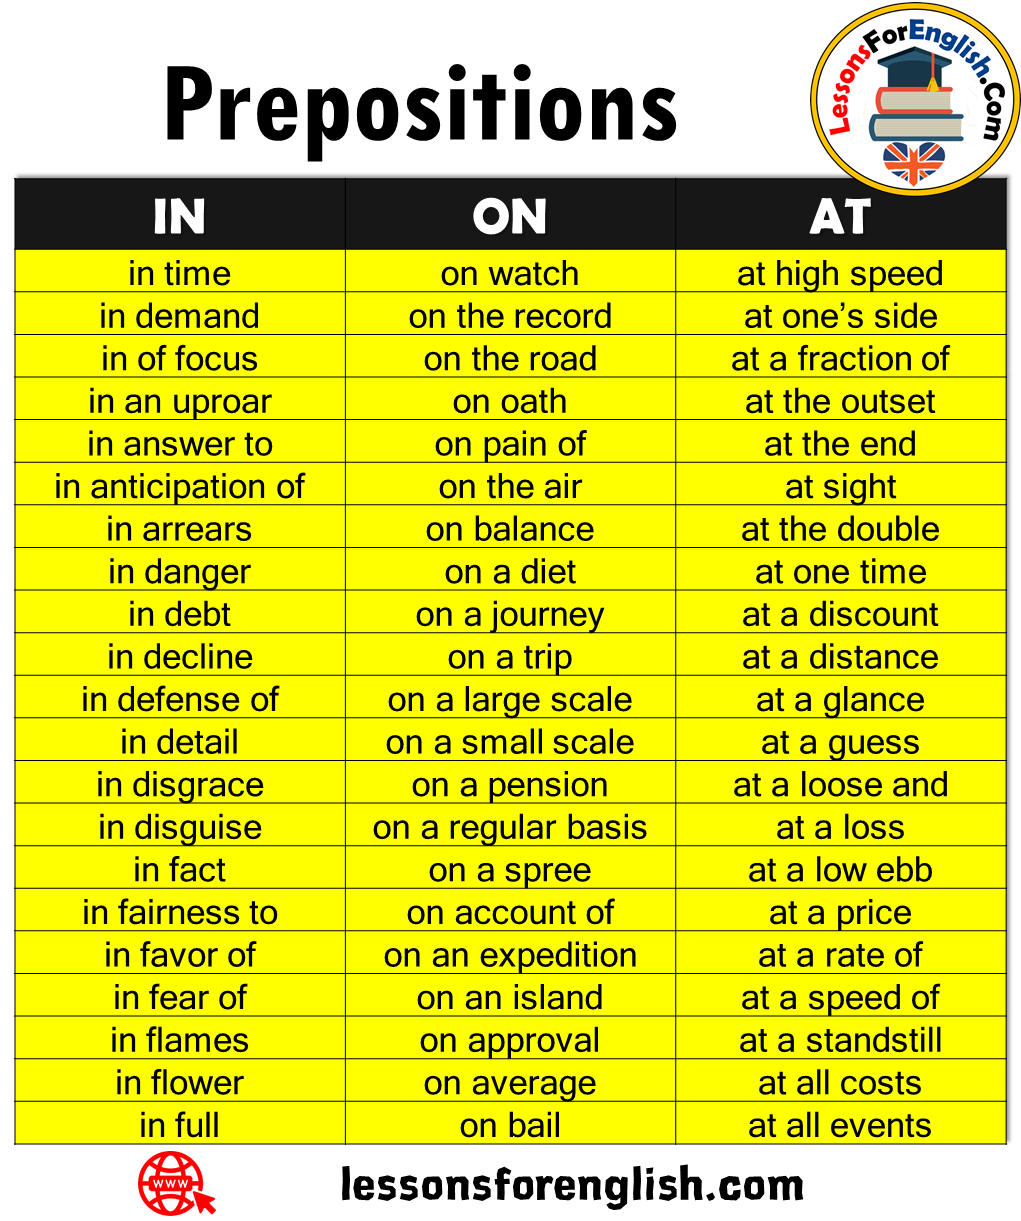 Prepositions - AT - Lessons For English